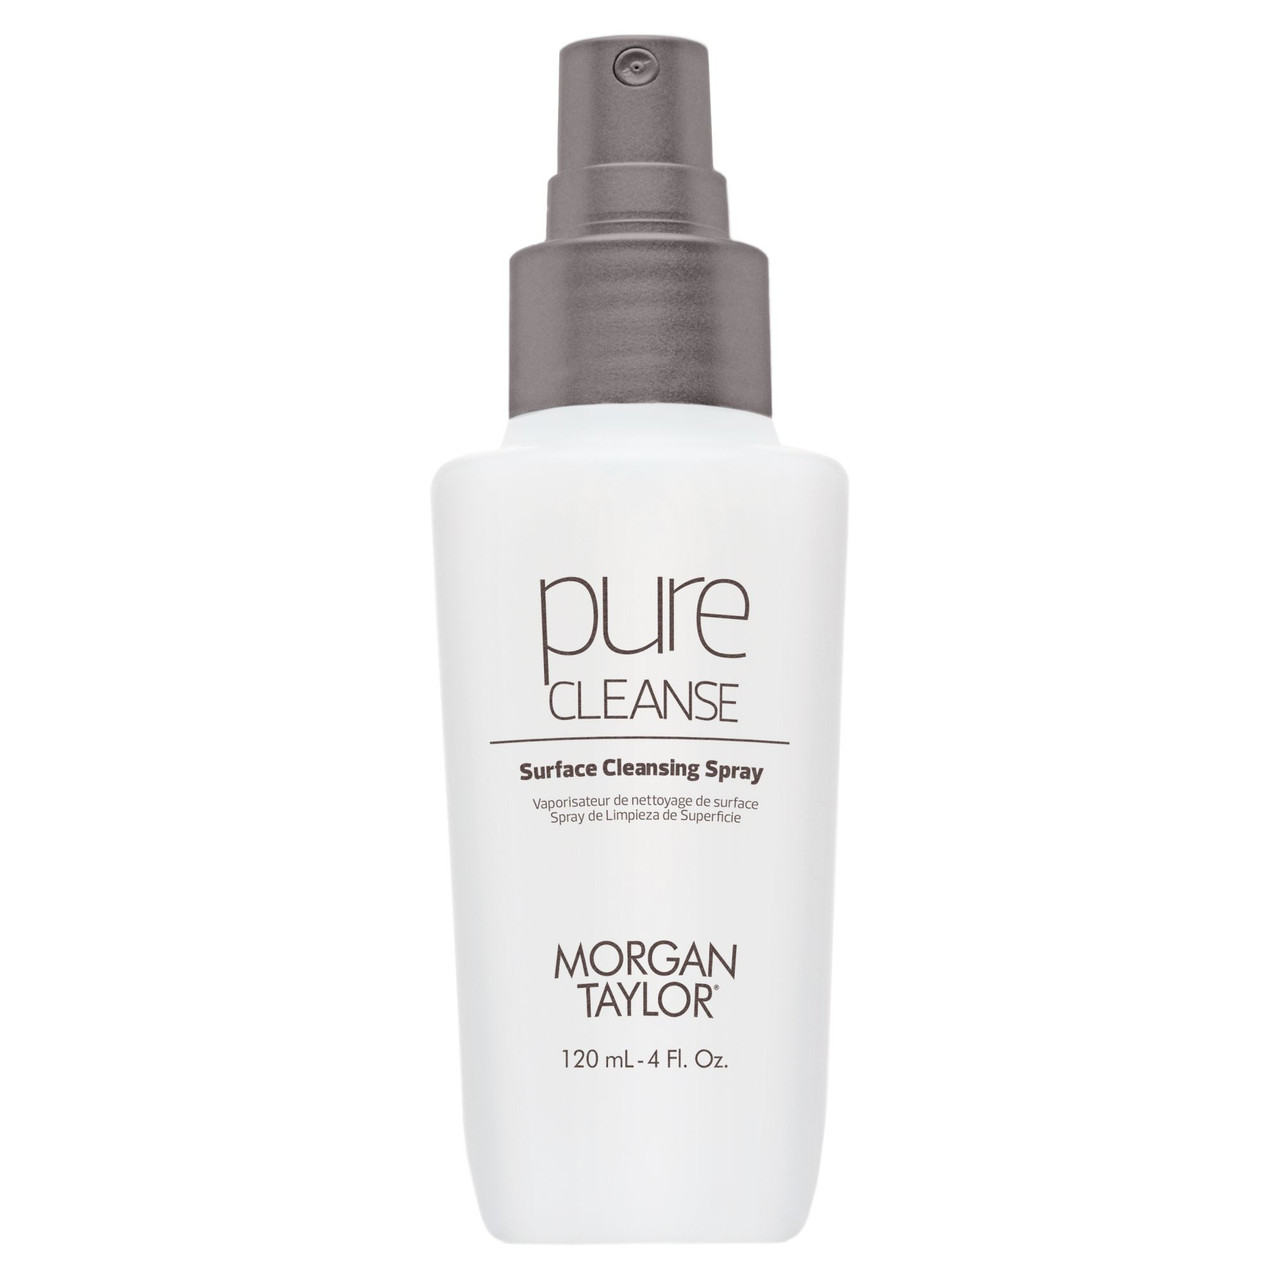 Morgan Taylor Pure Cleanse - Nail Cleansing Spray, 120 mL